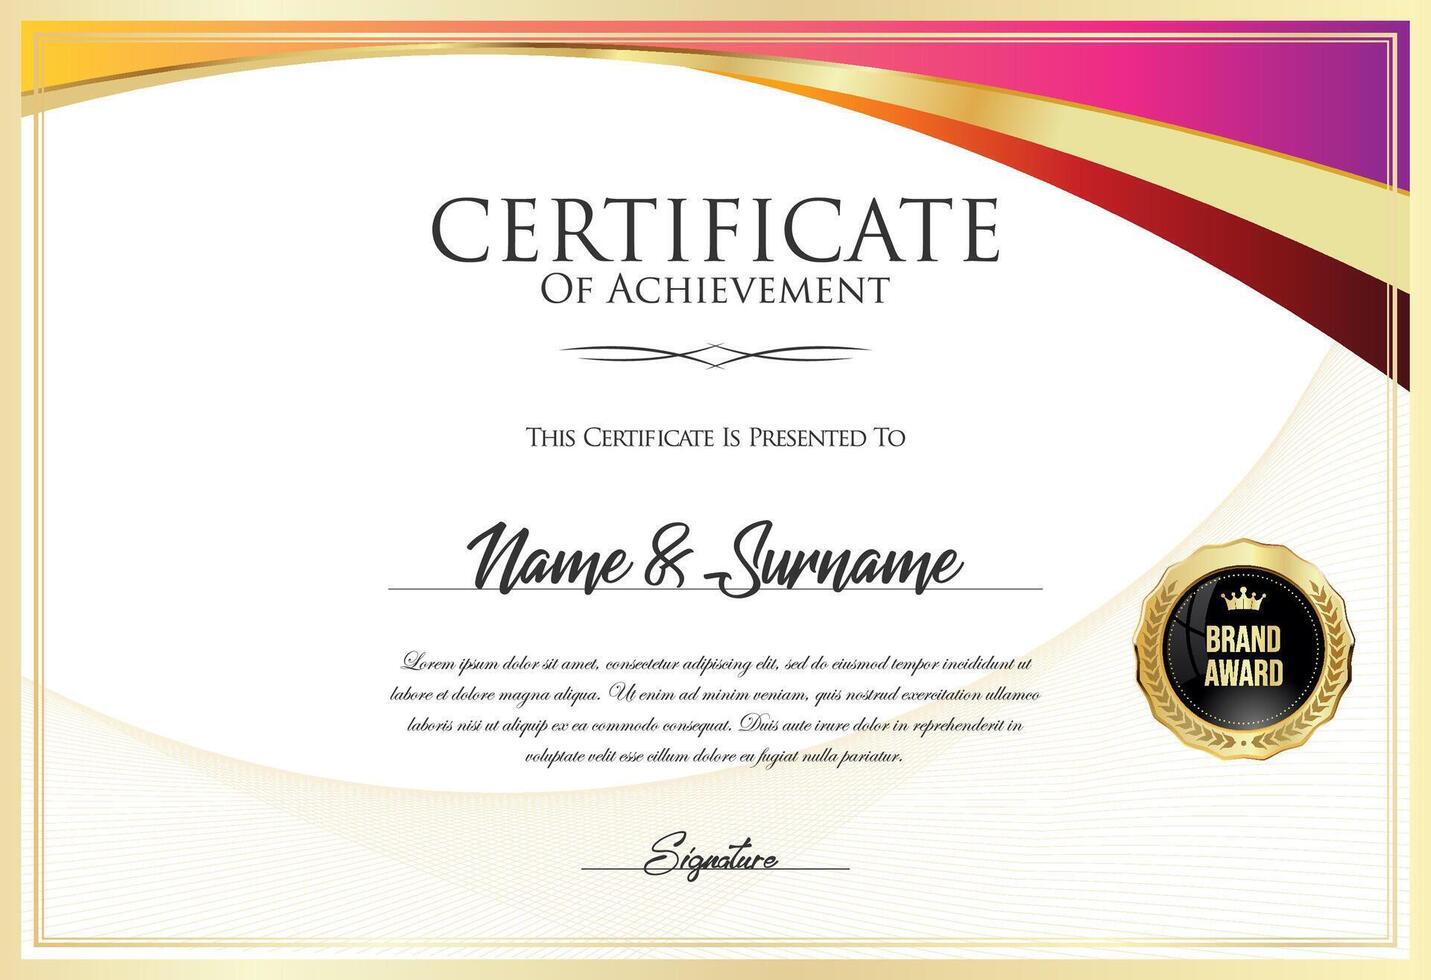 Certificate with golden seal and colorful design border vector